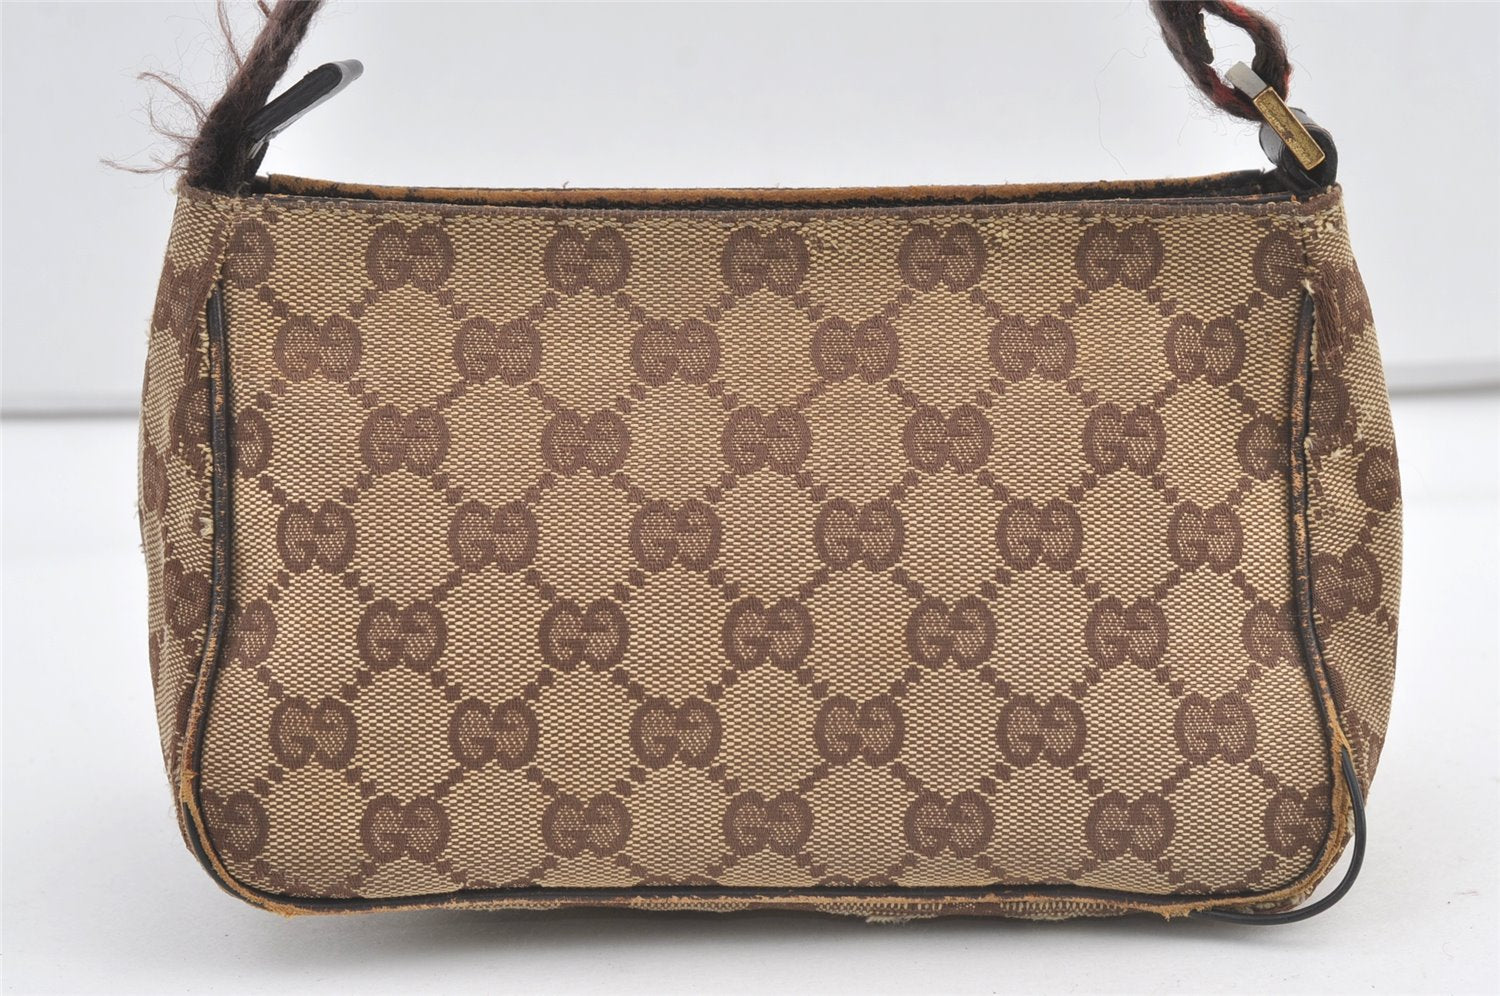 Authentic GUCCI Hand Bag Pouch Purse GG Canvas Leather 106644 Brown 8251J